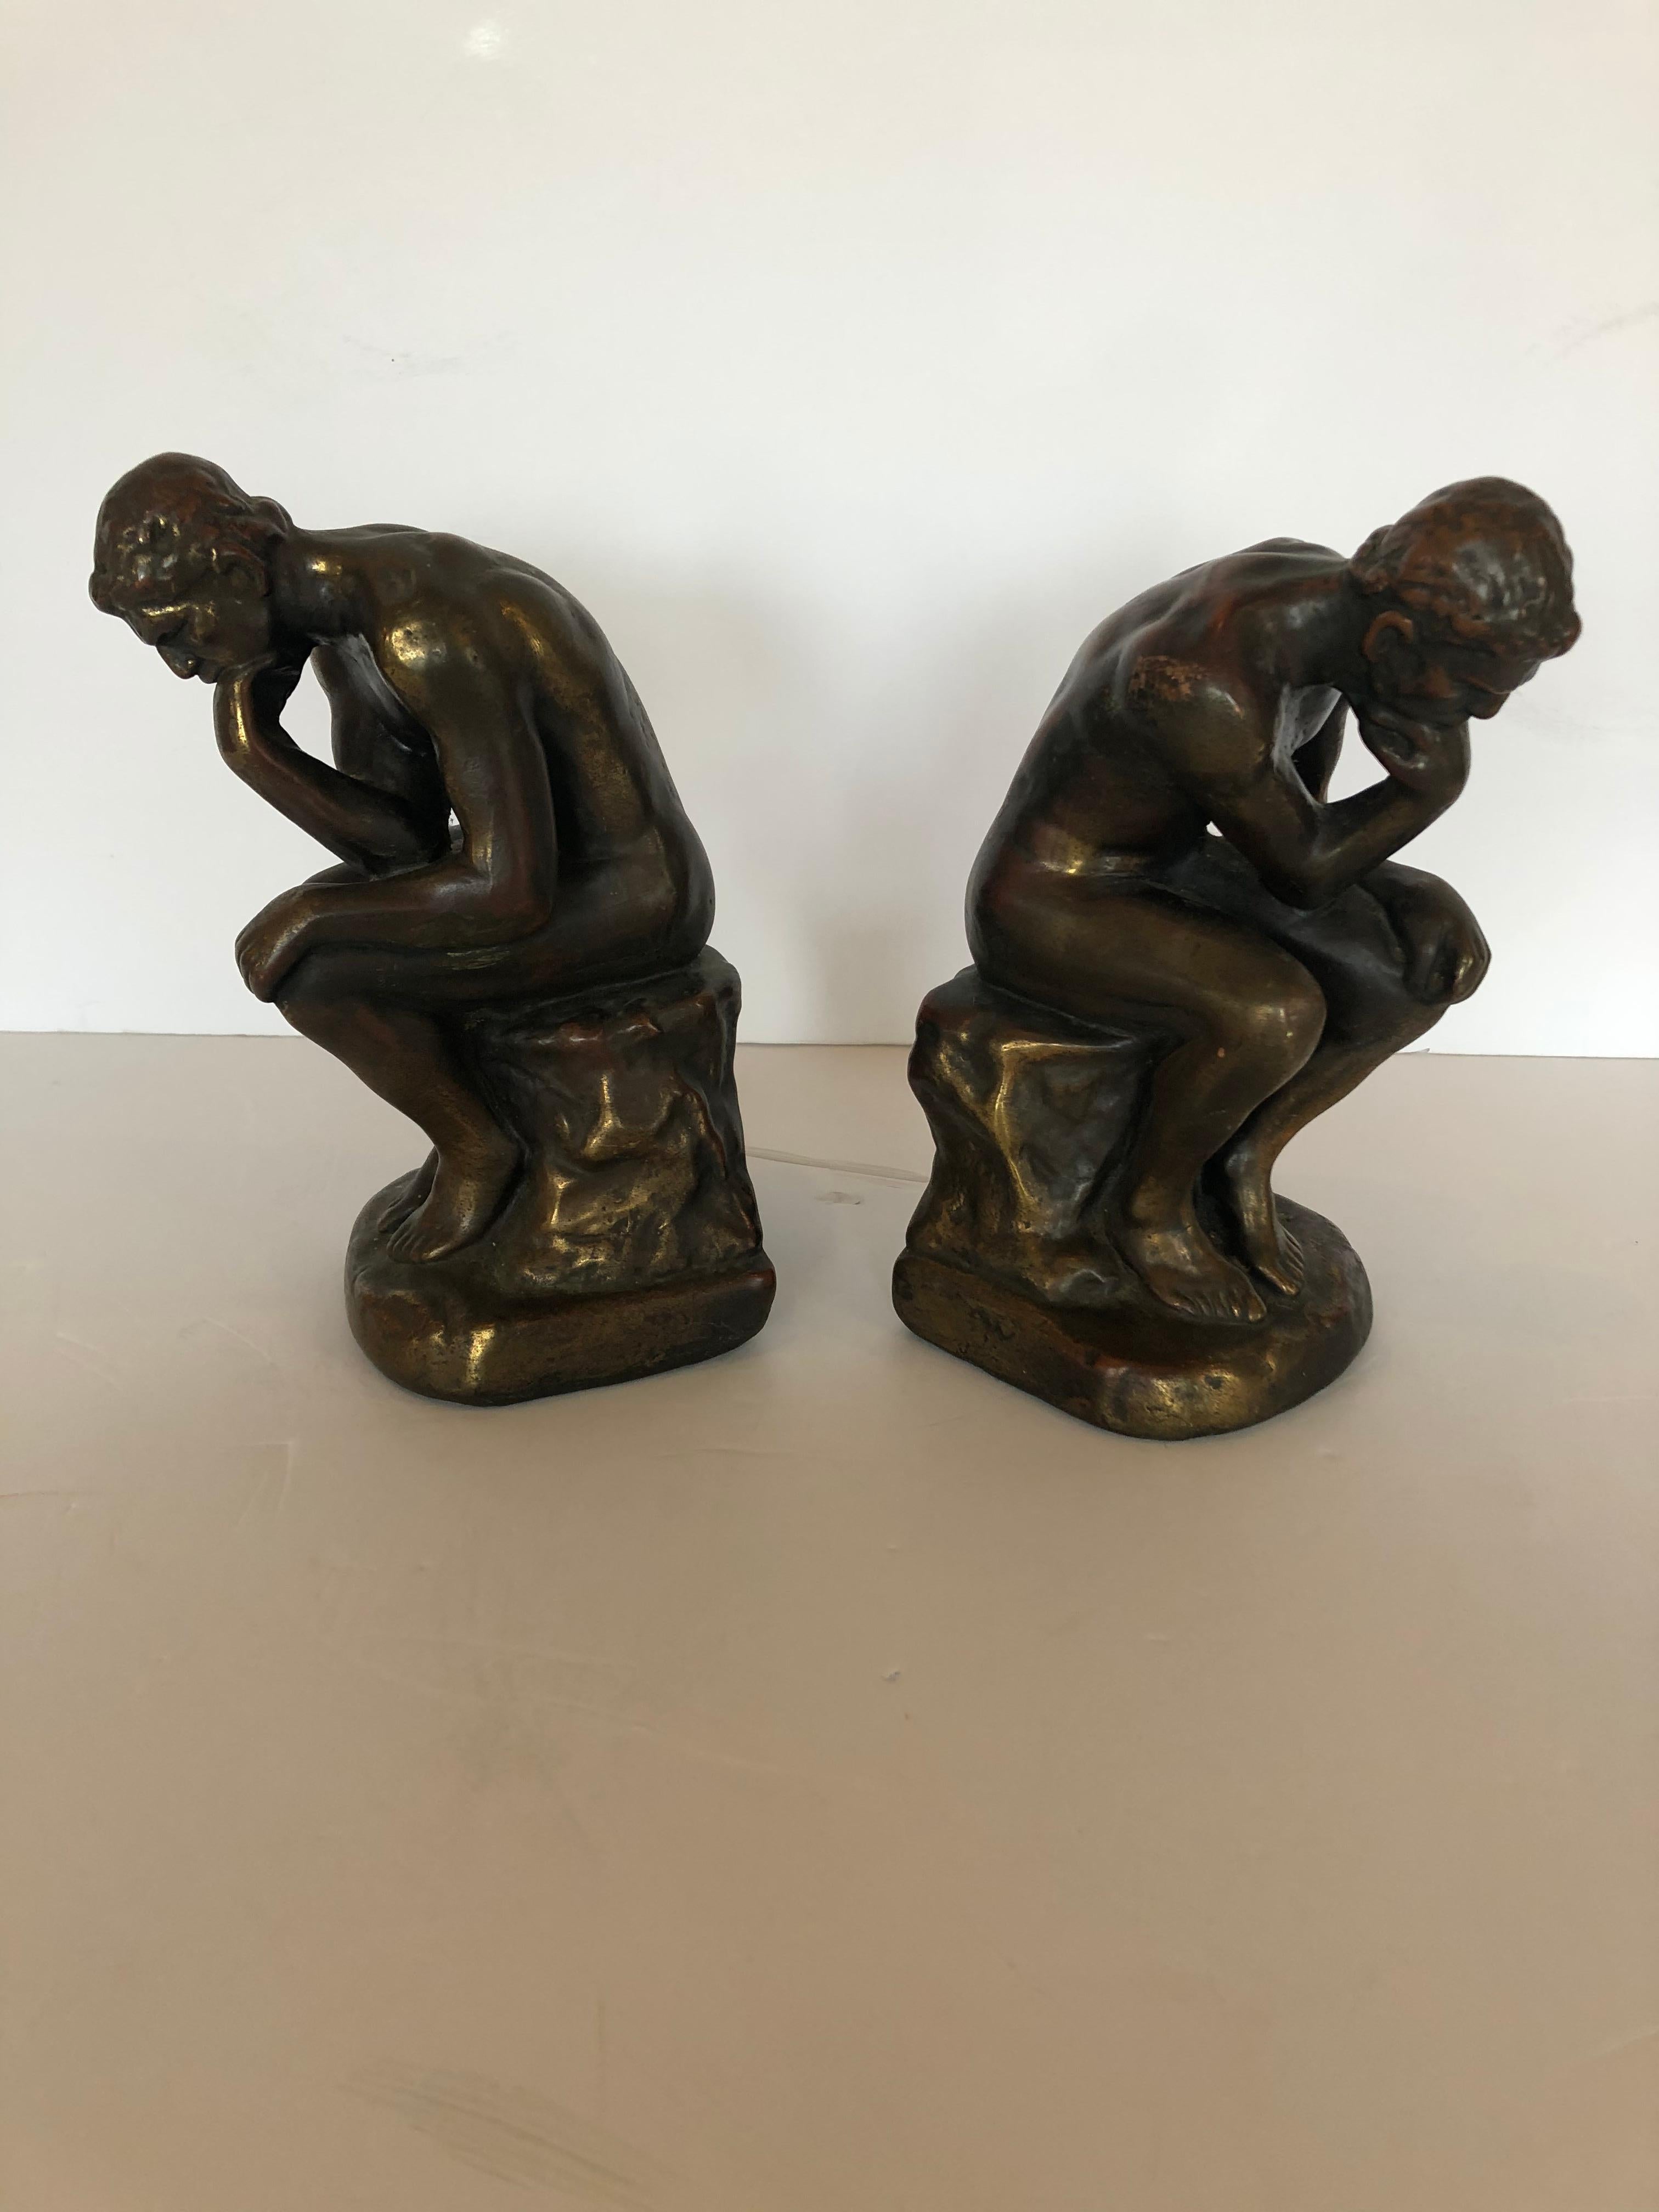 A handsome bronze clad pair of bookends in the shape of muscular male nude thinkers.
No signature.